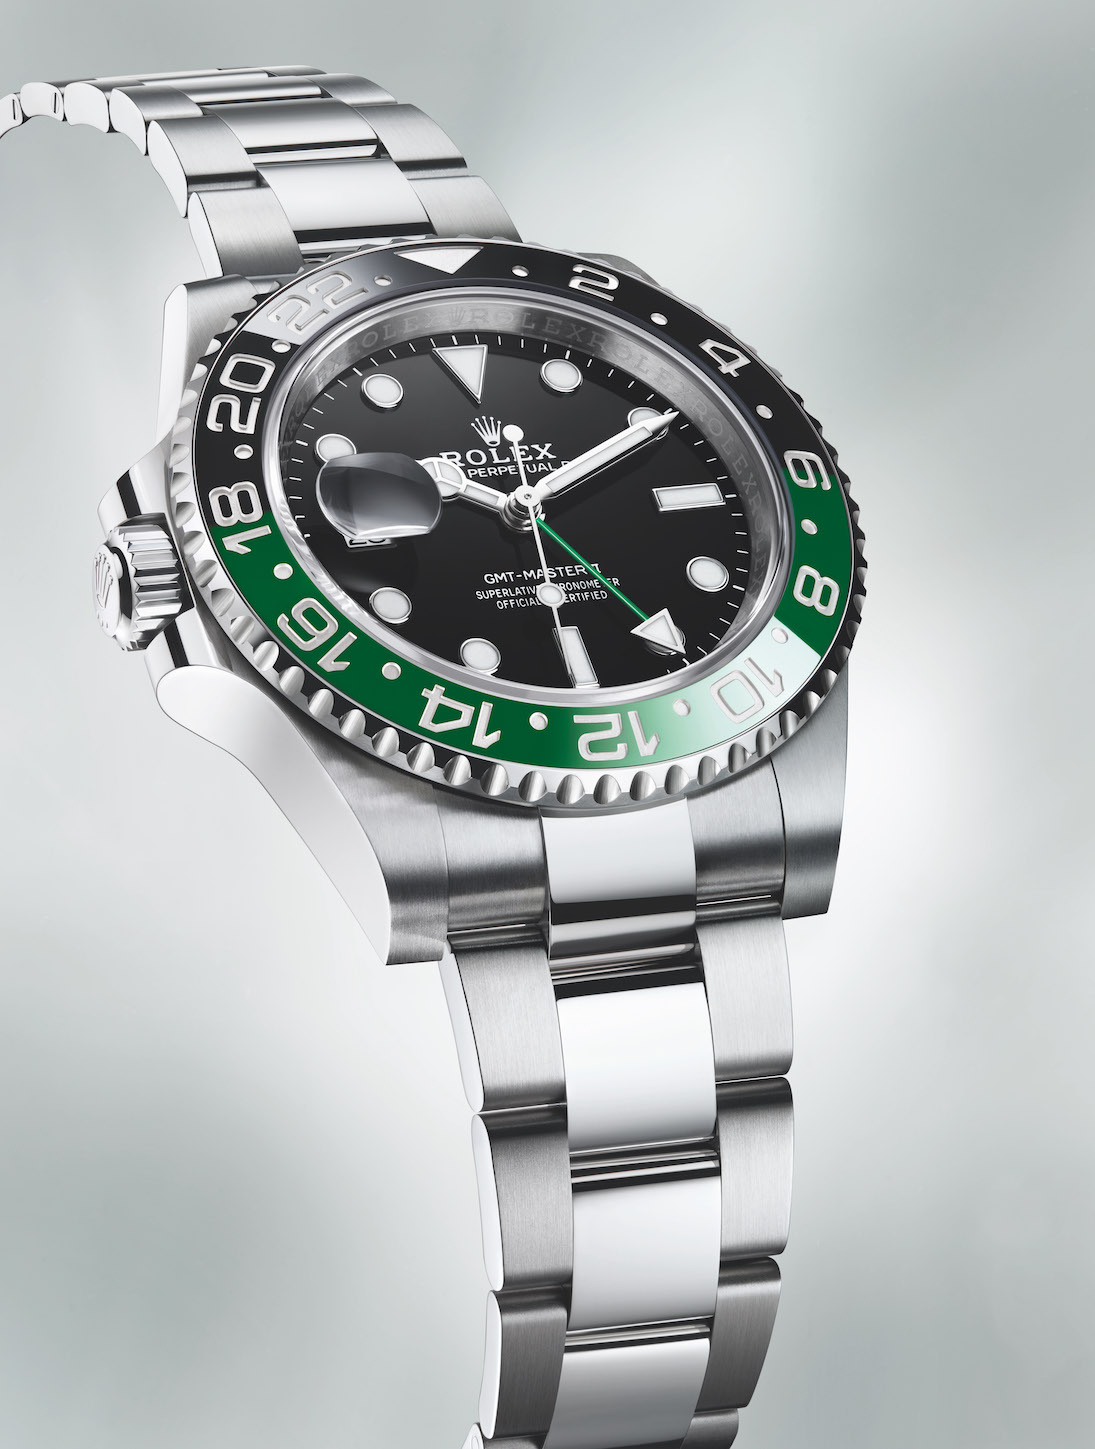 Rolex Oyster Perpetual GMT-Master II verde y negro front